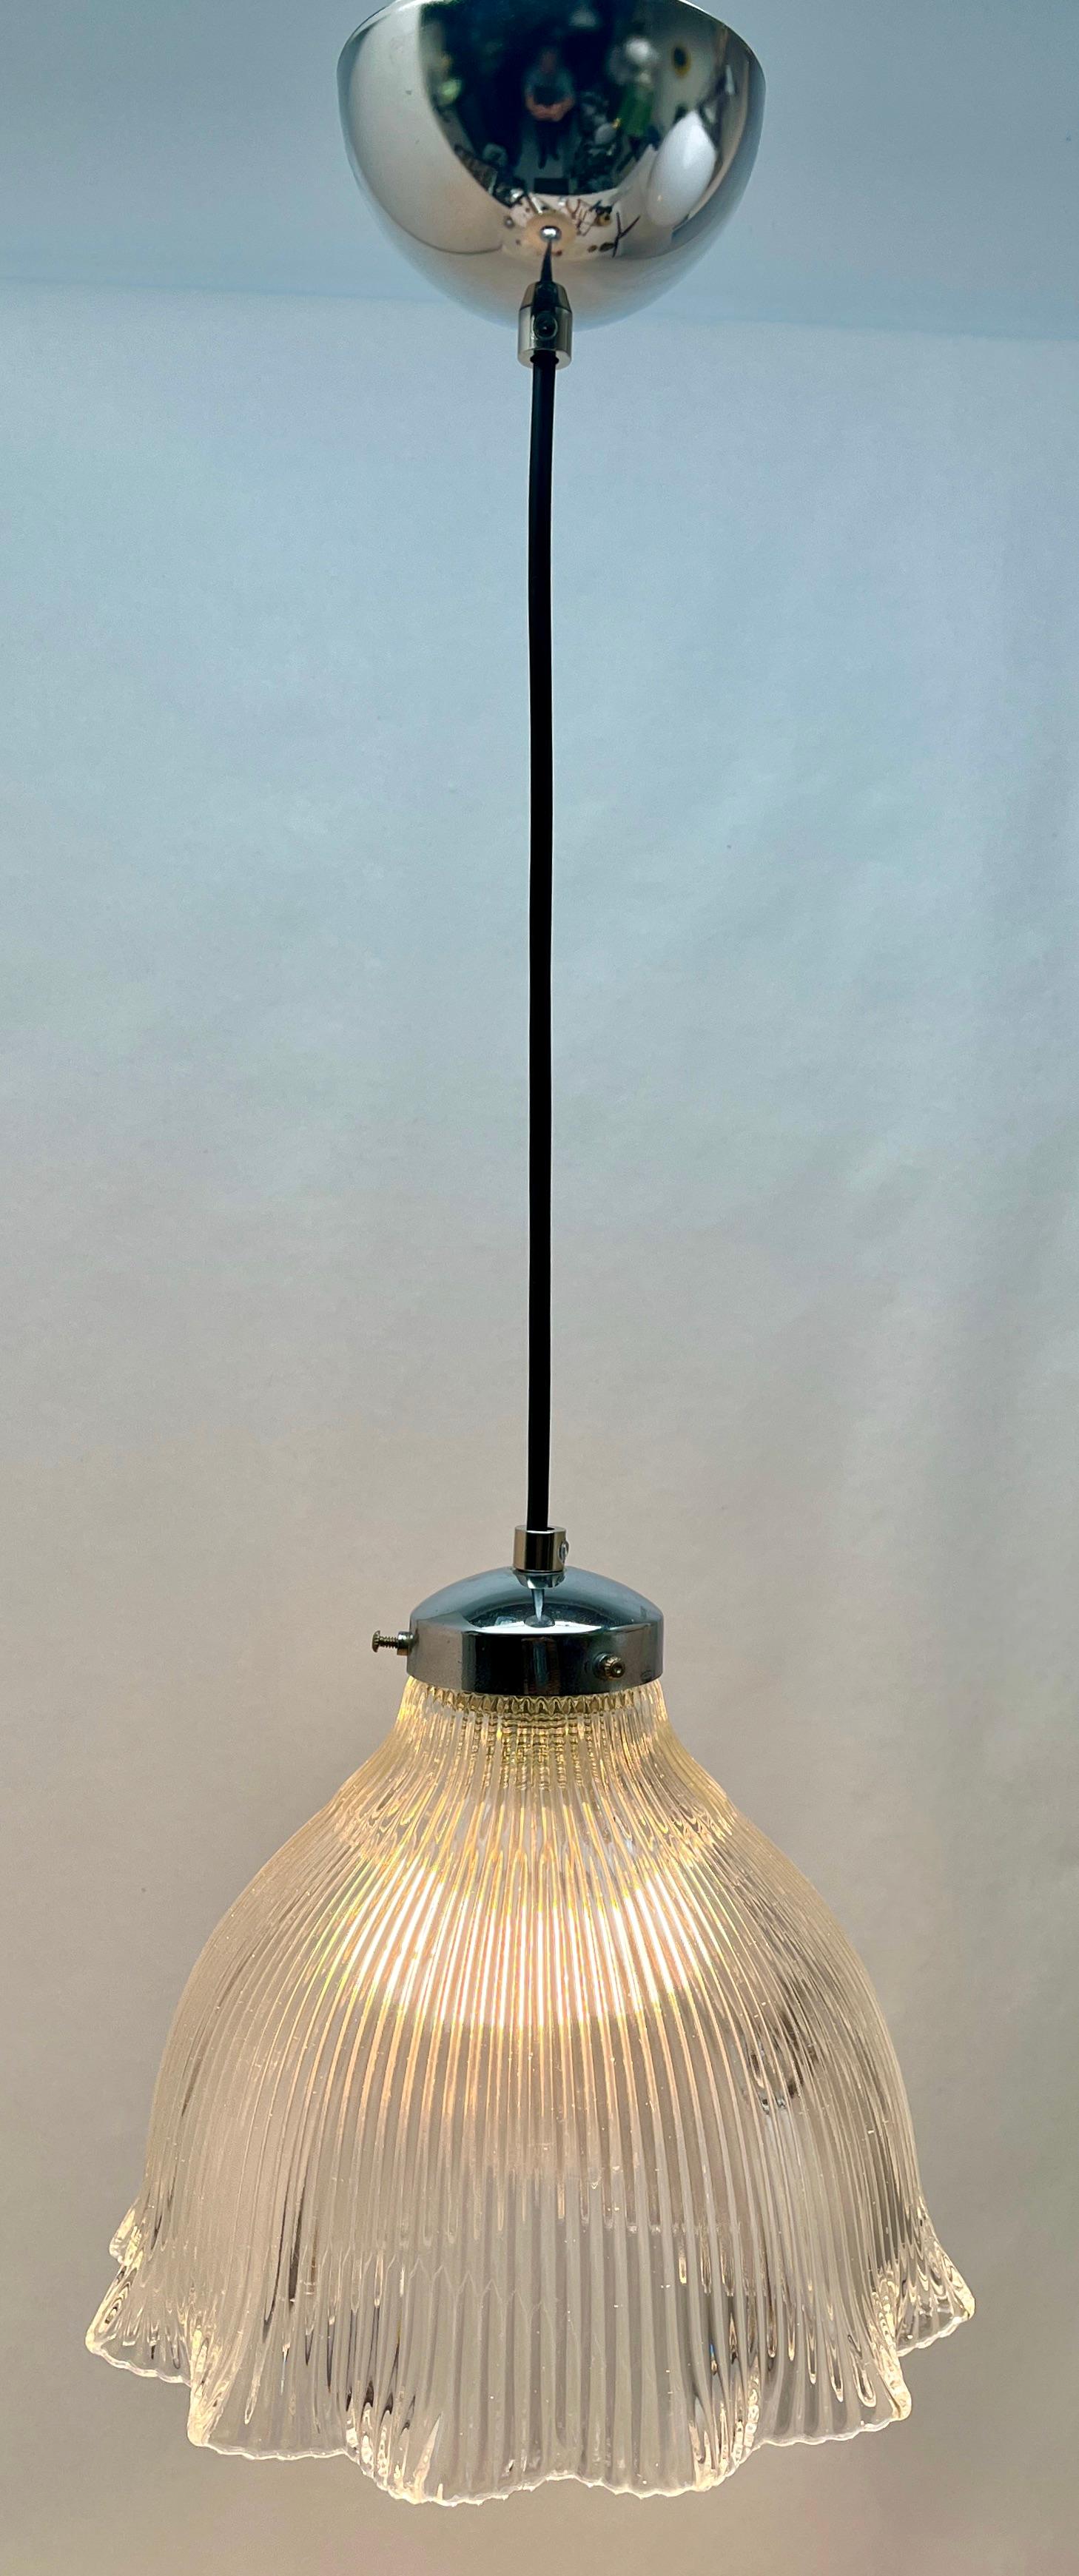 Dutch Pendant Lamp with a Corrugated Glass Shade, 1950s, Netherlands For Sale